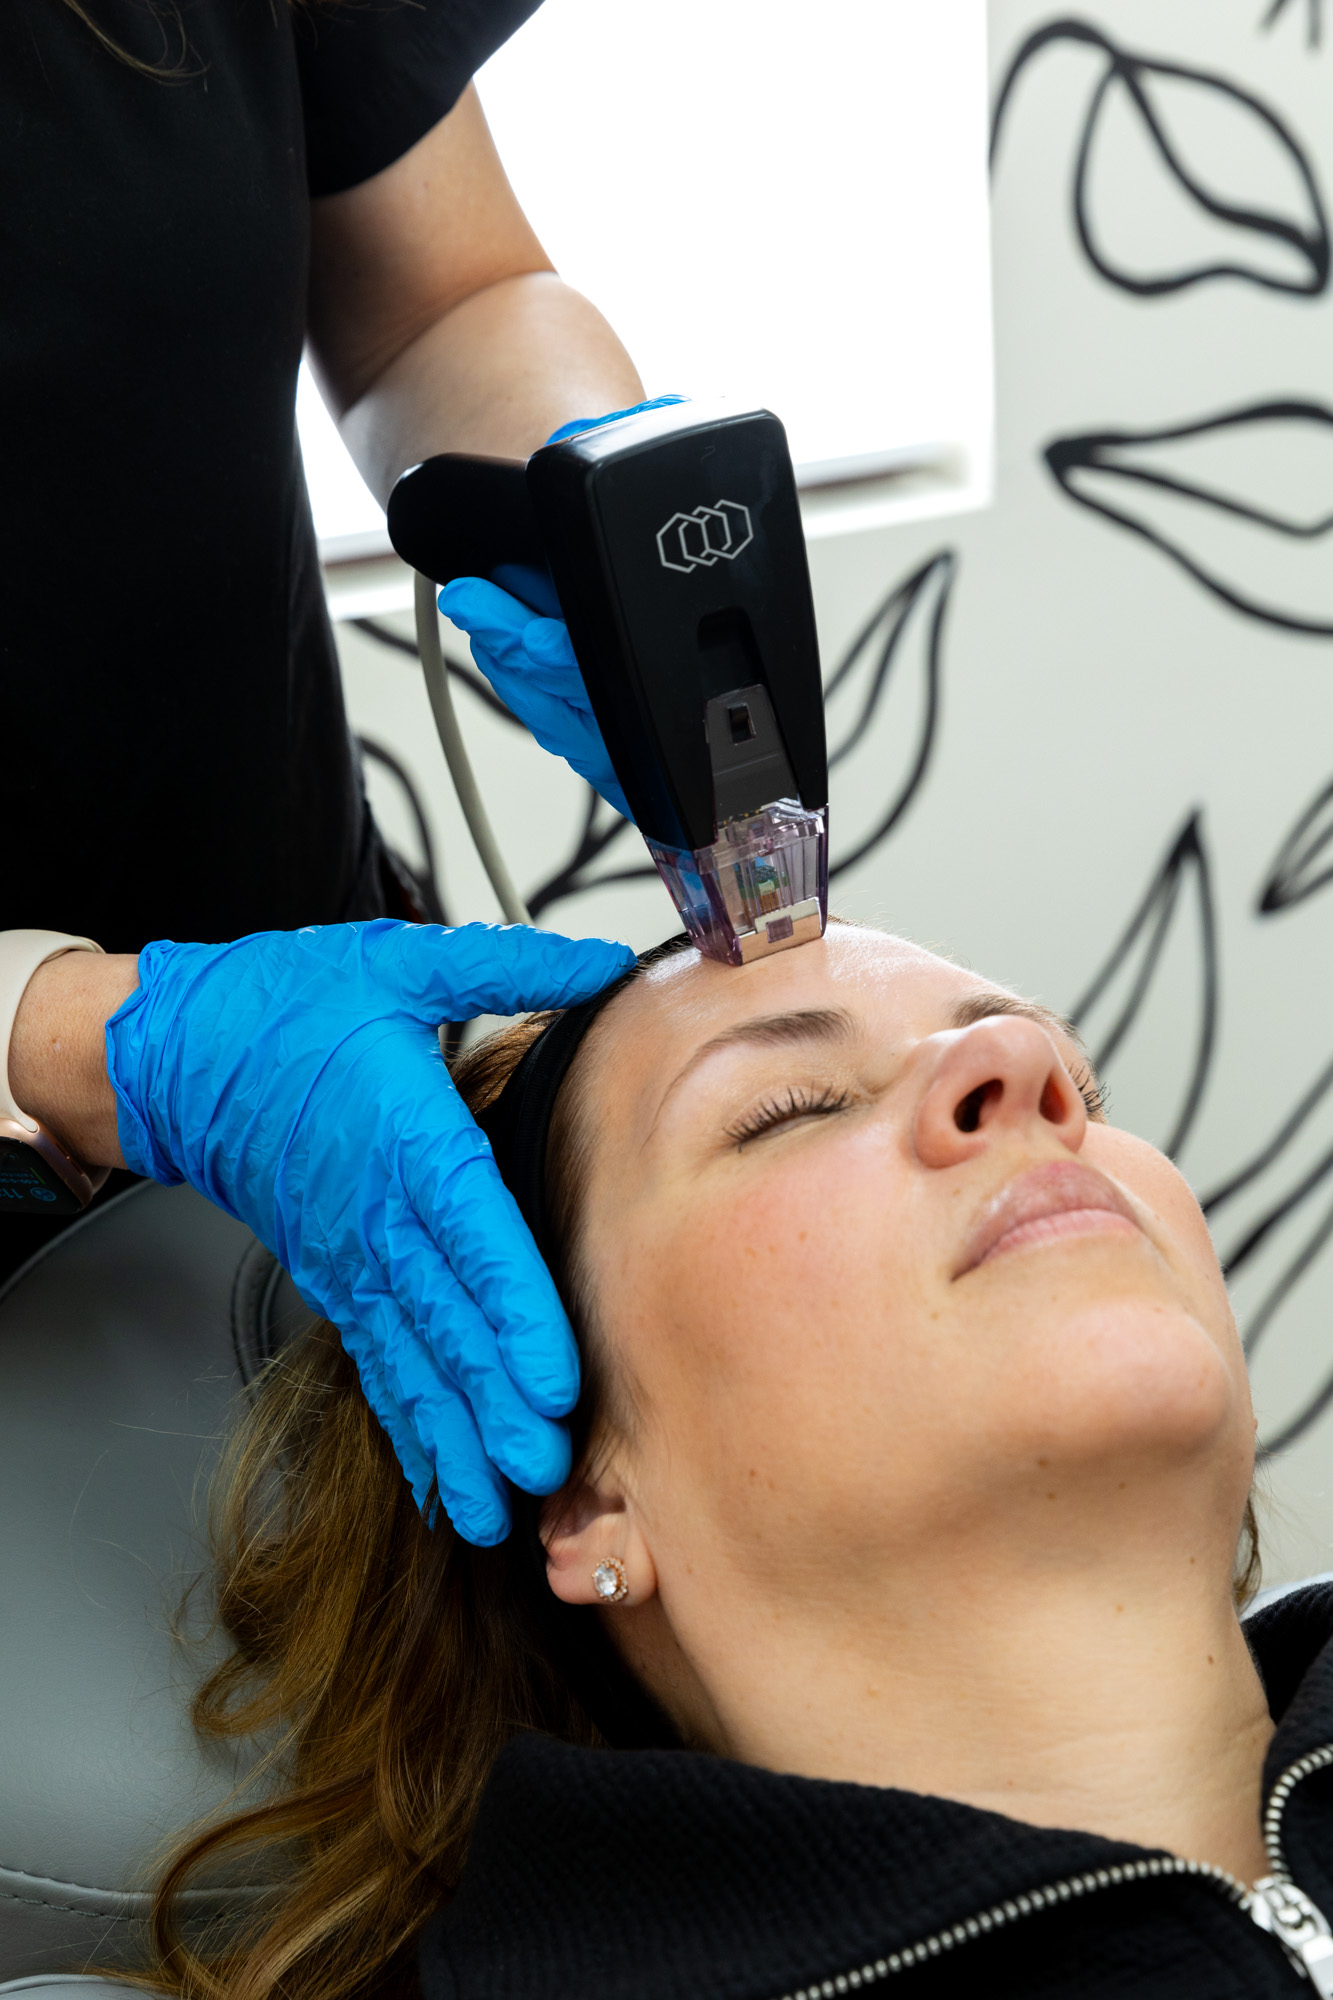 a woman is recieving a body sculpting treatment via a morpheus8 device pressed to her forehead